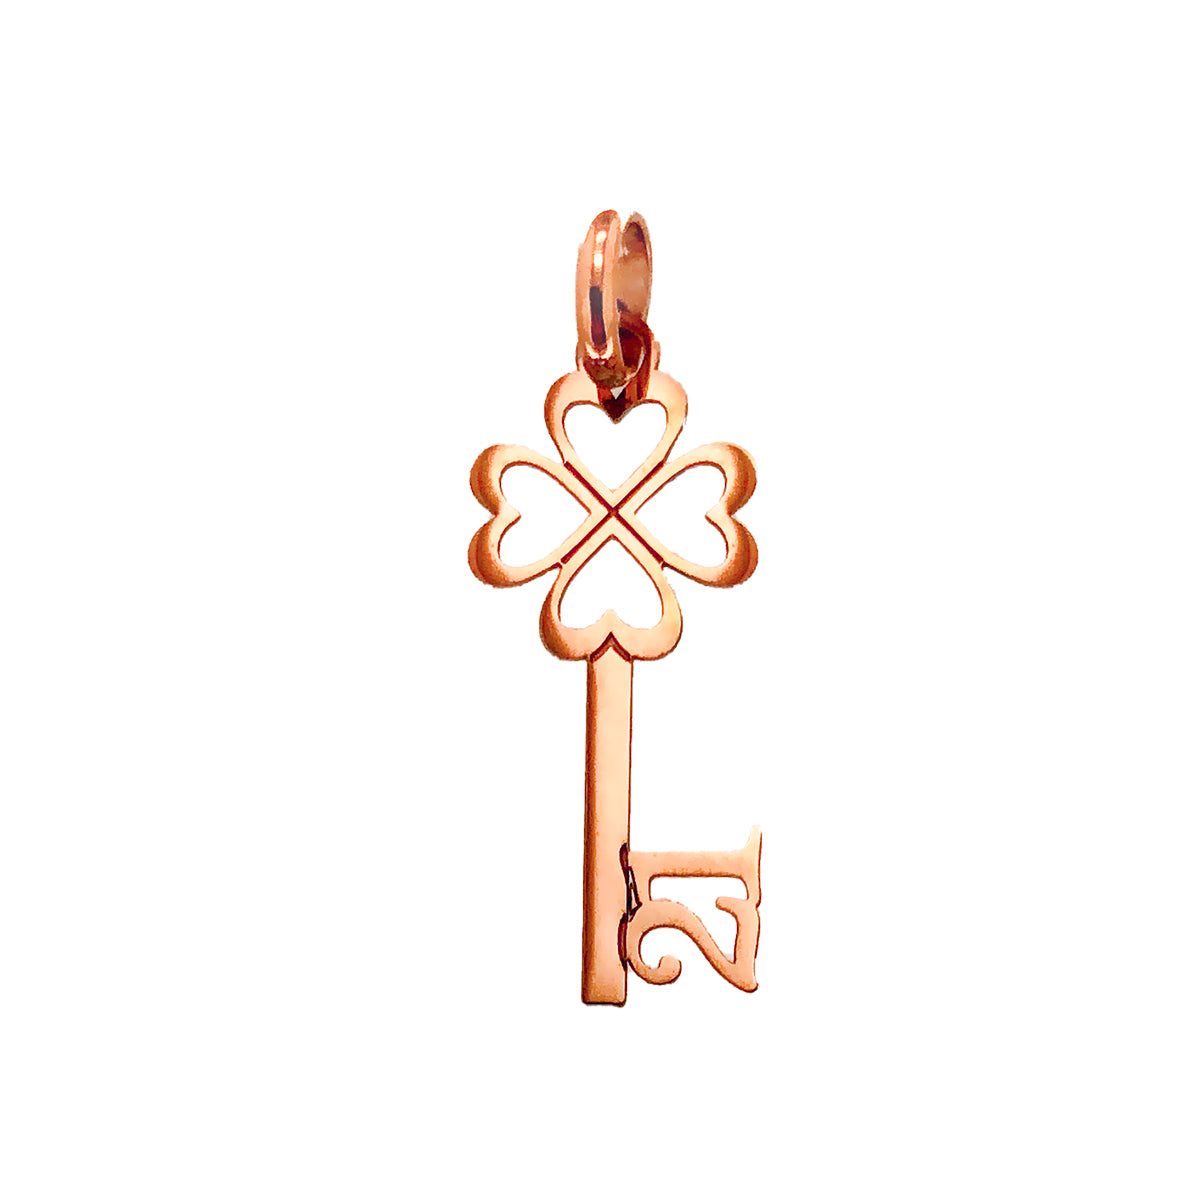 21st Lucky Clover Key Pendant in 9ct Rose Gold